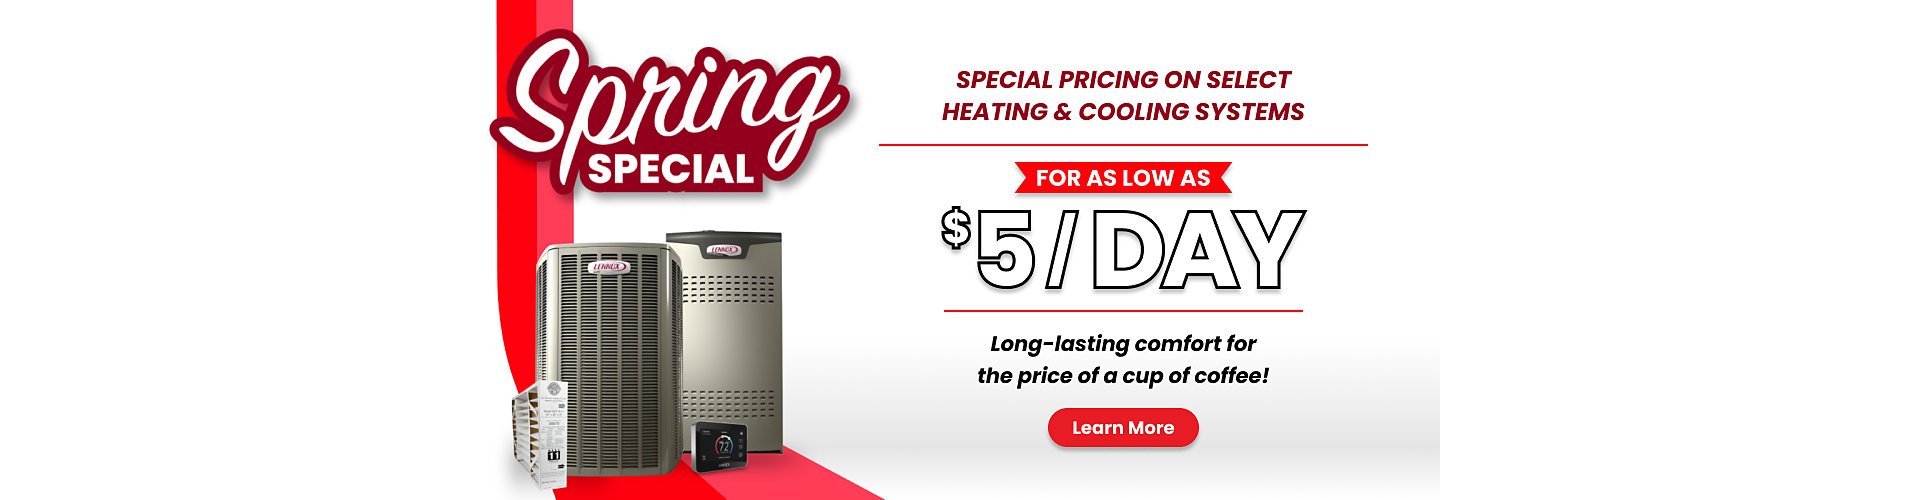 Spring Special New Systems as low as $5 a day.